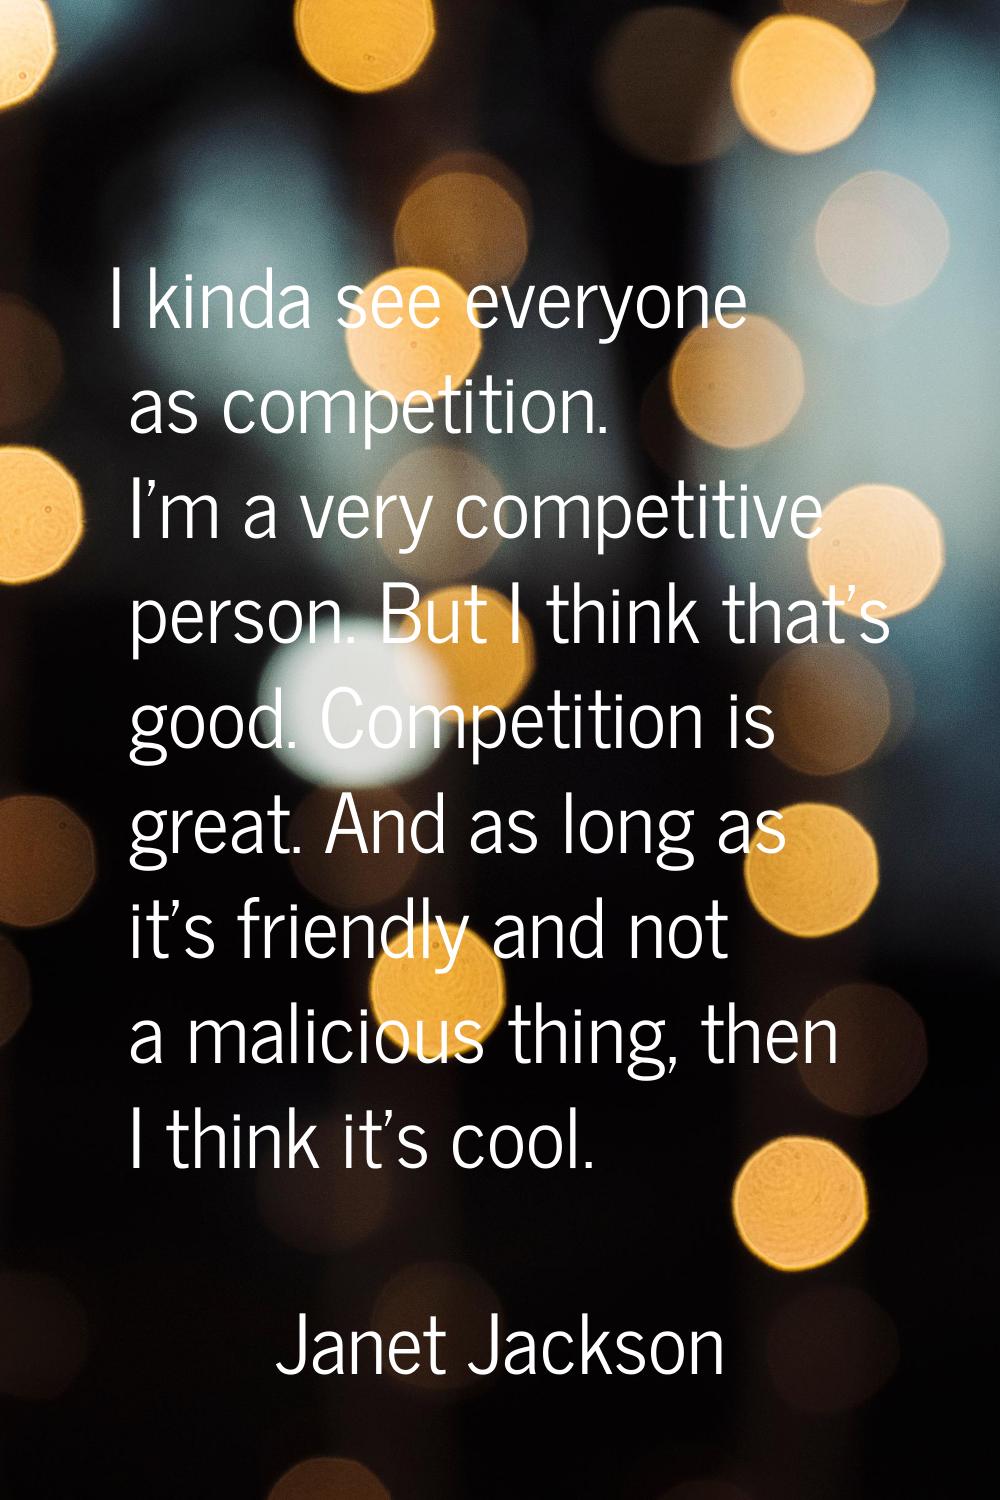 I kinda see everyone as competition. I'm a very competitive person. But I think that's good. Compet